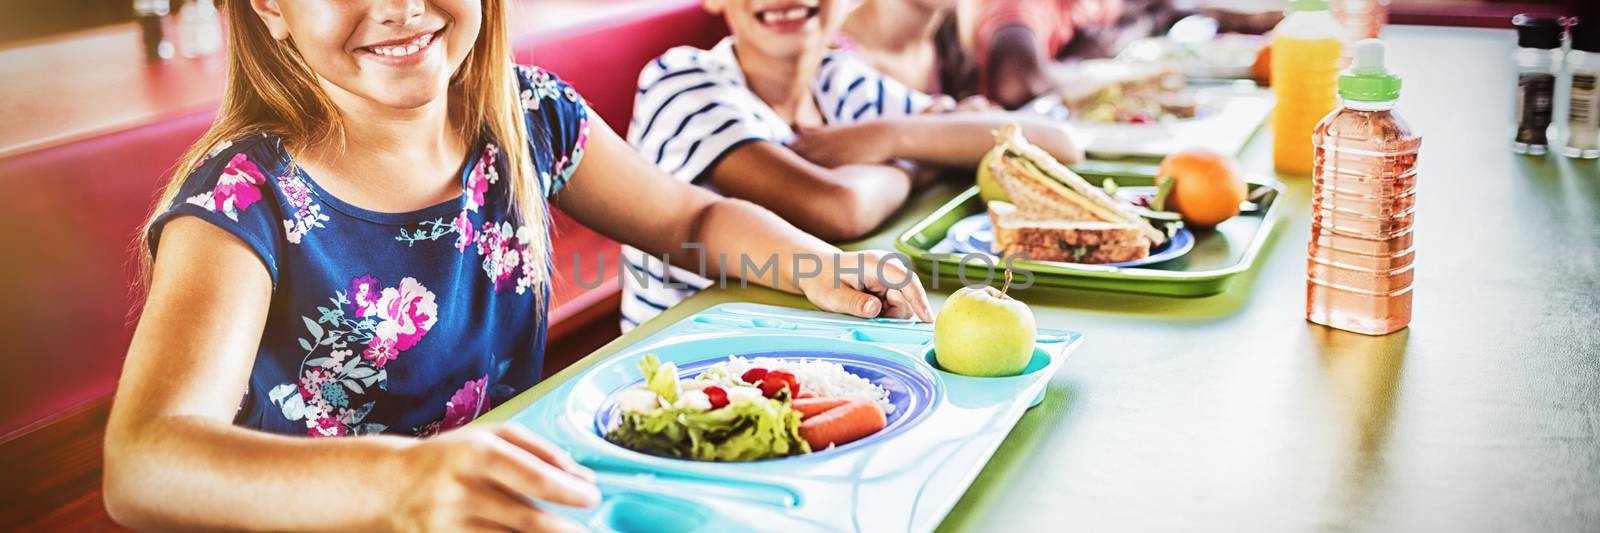 Children eating at the canteen at school